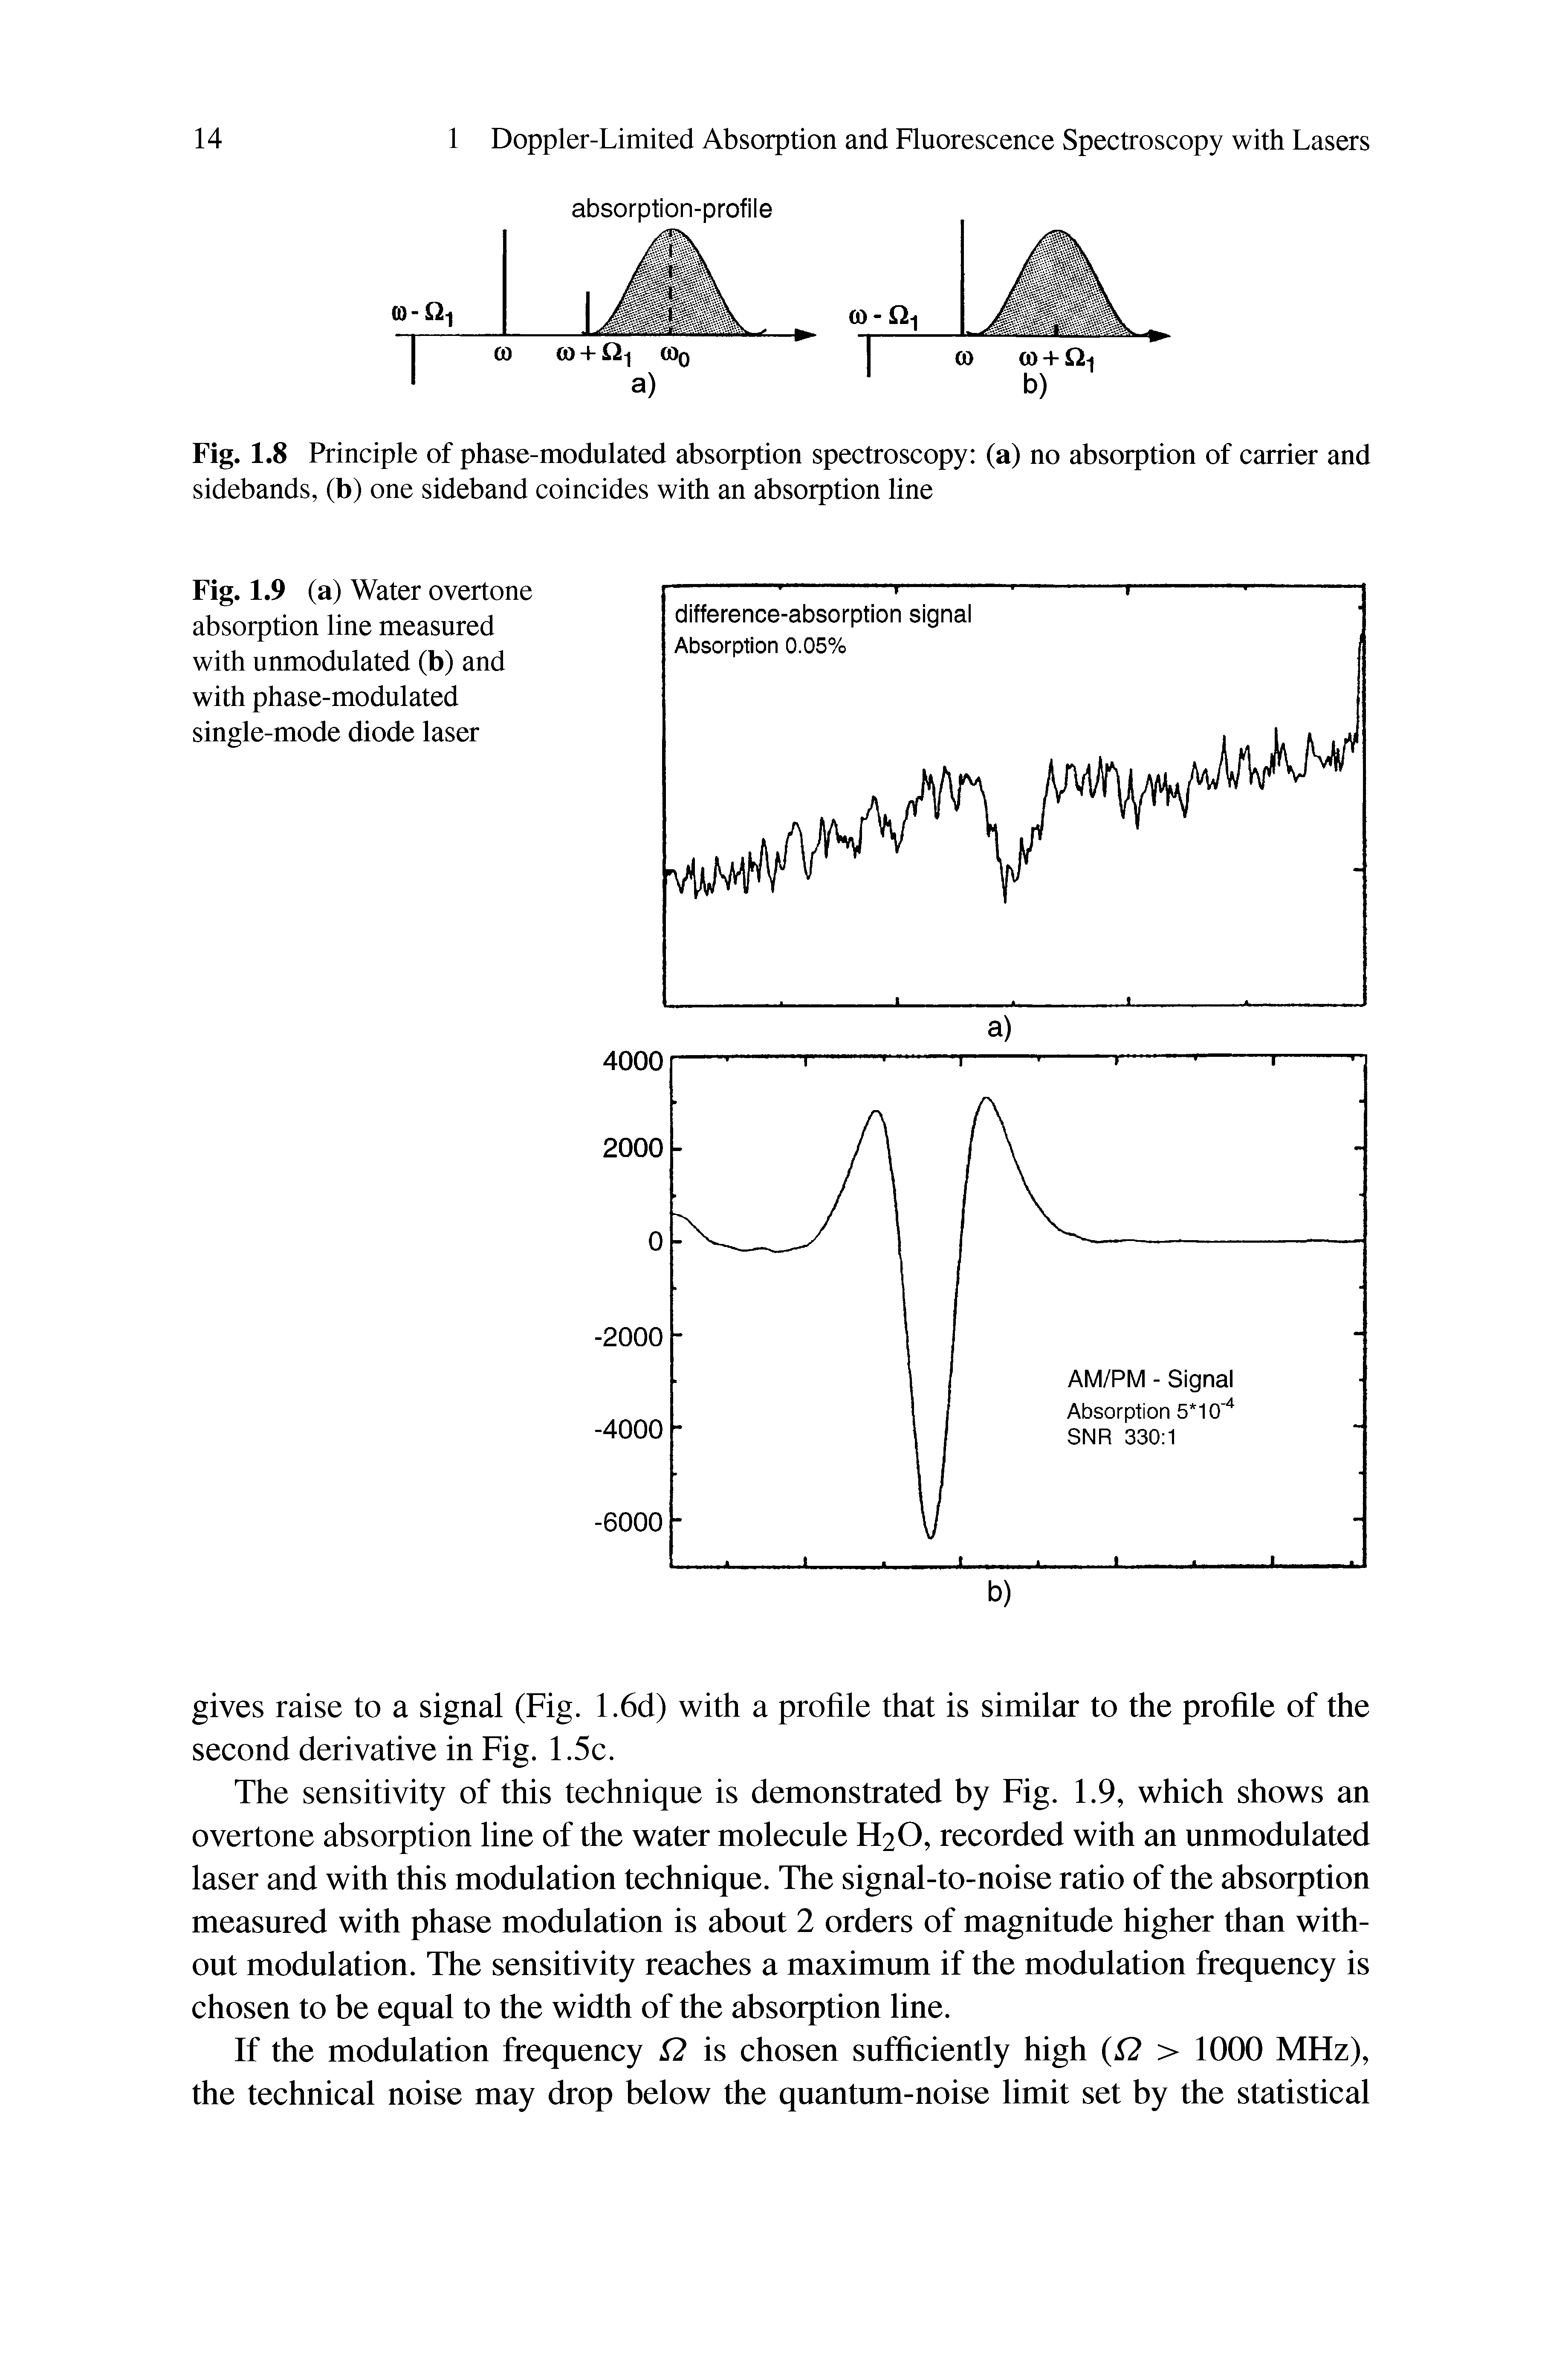 Fig. 1.8 Principle of phase-modulated absorption spectroscopy (a) no absorption of carrier and sidebands, (b) one sideband coincides with an absorption line...